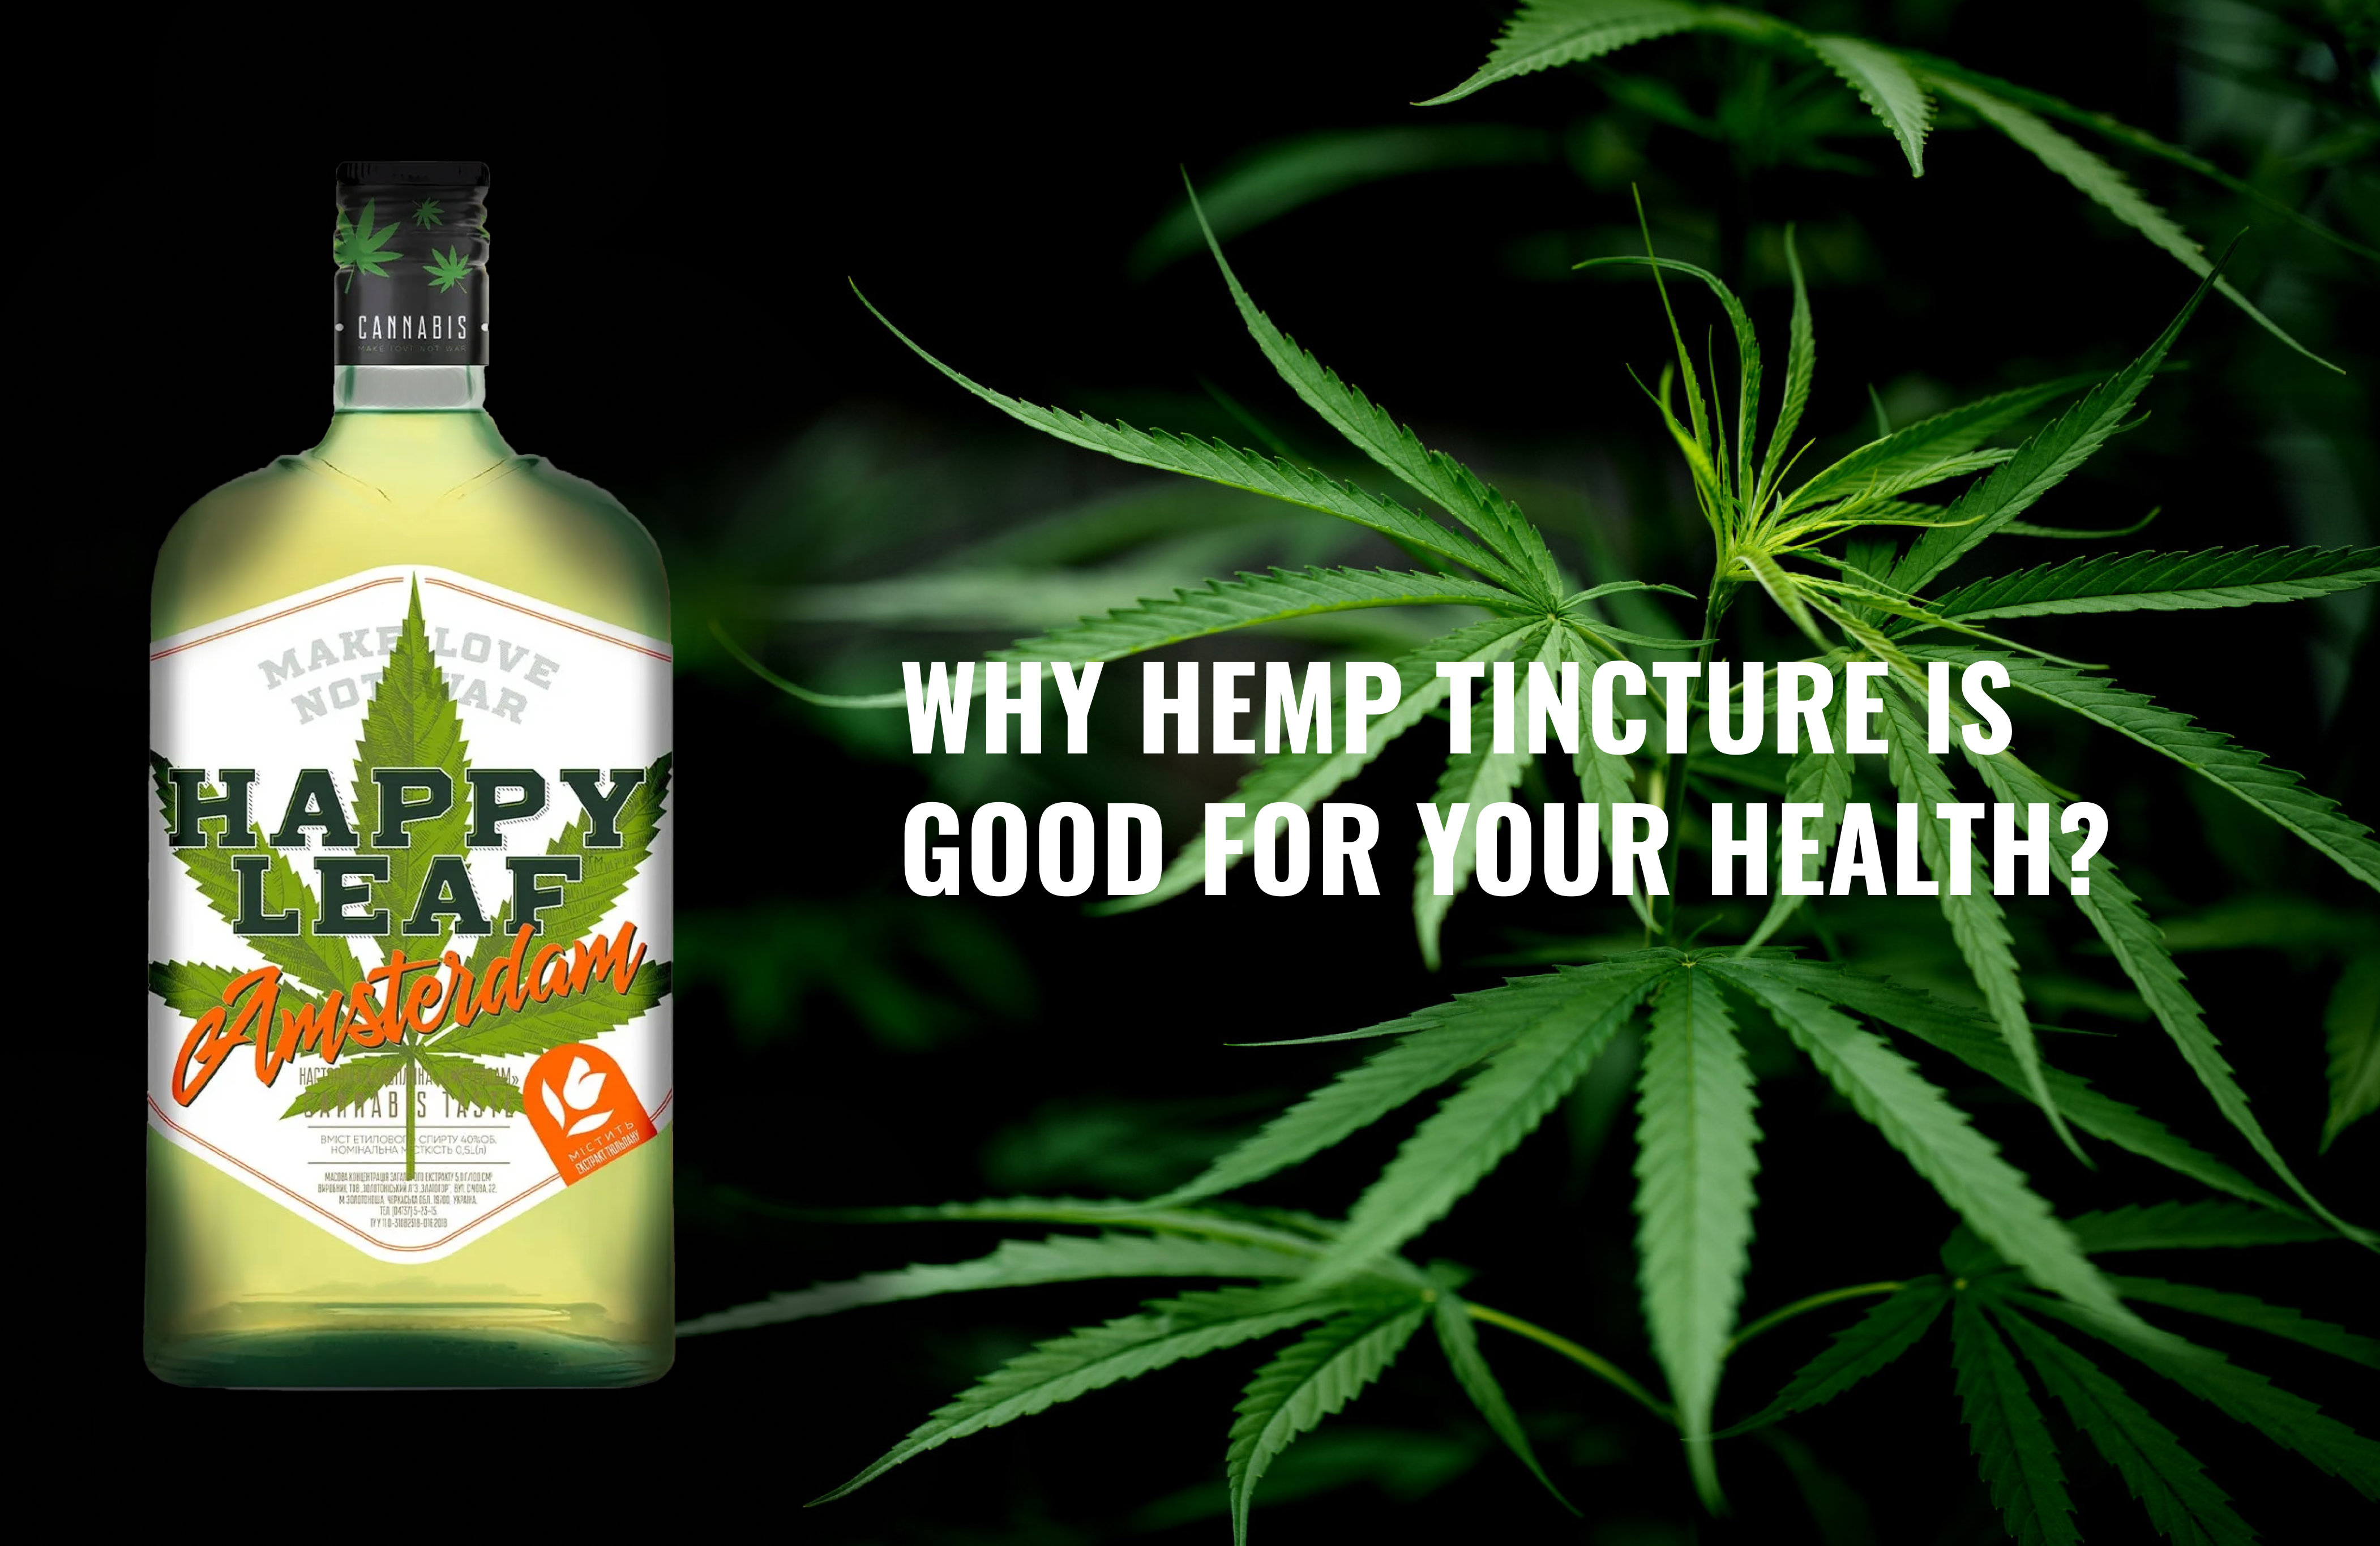 Why Hemp Tincture Is Good for Your Health